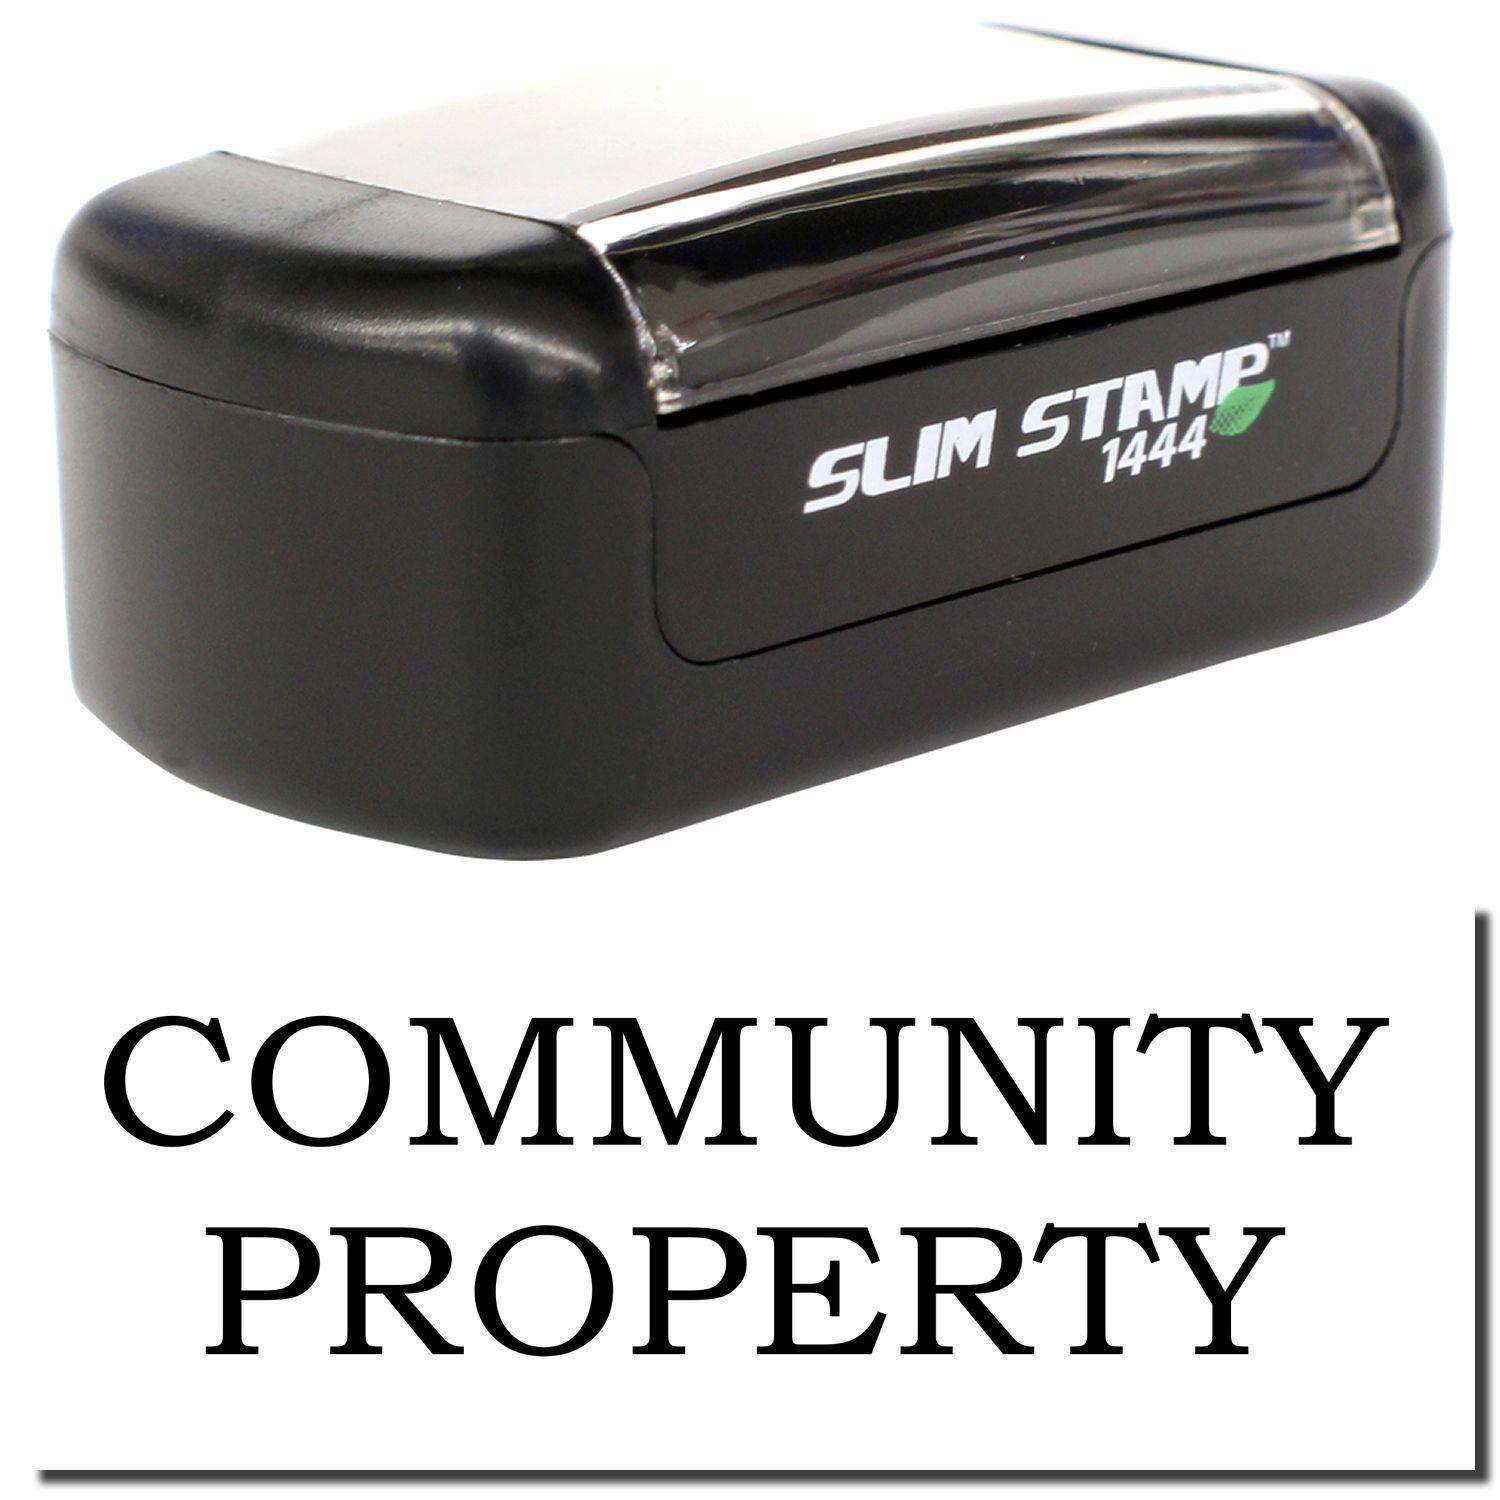 A stock office pre-inked stamp with a stamped image showing how the text "COMMUNITY PROPERTY" is displayed after stamping.